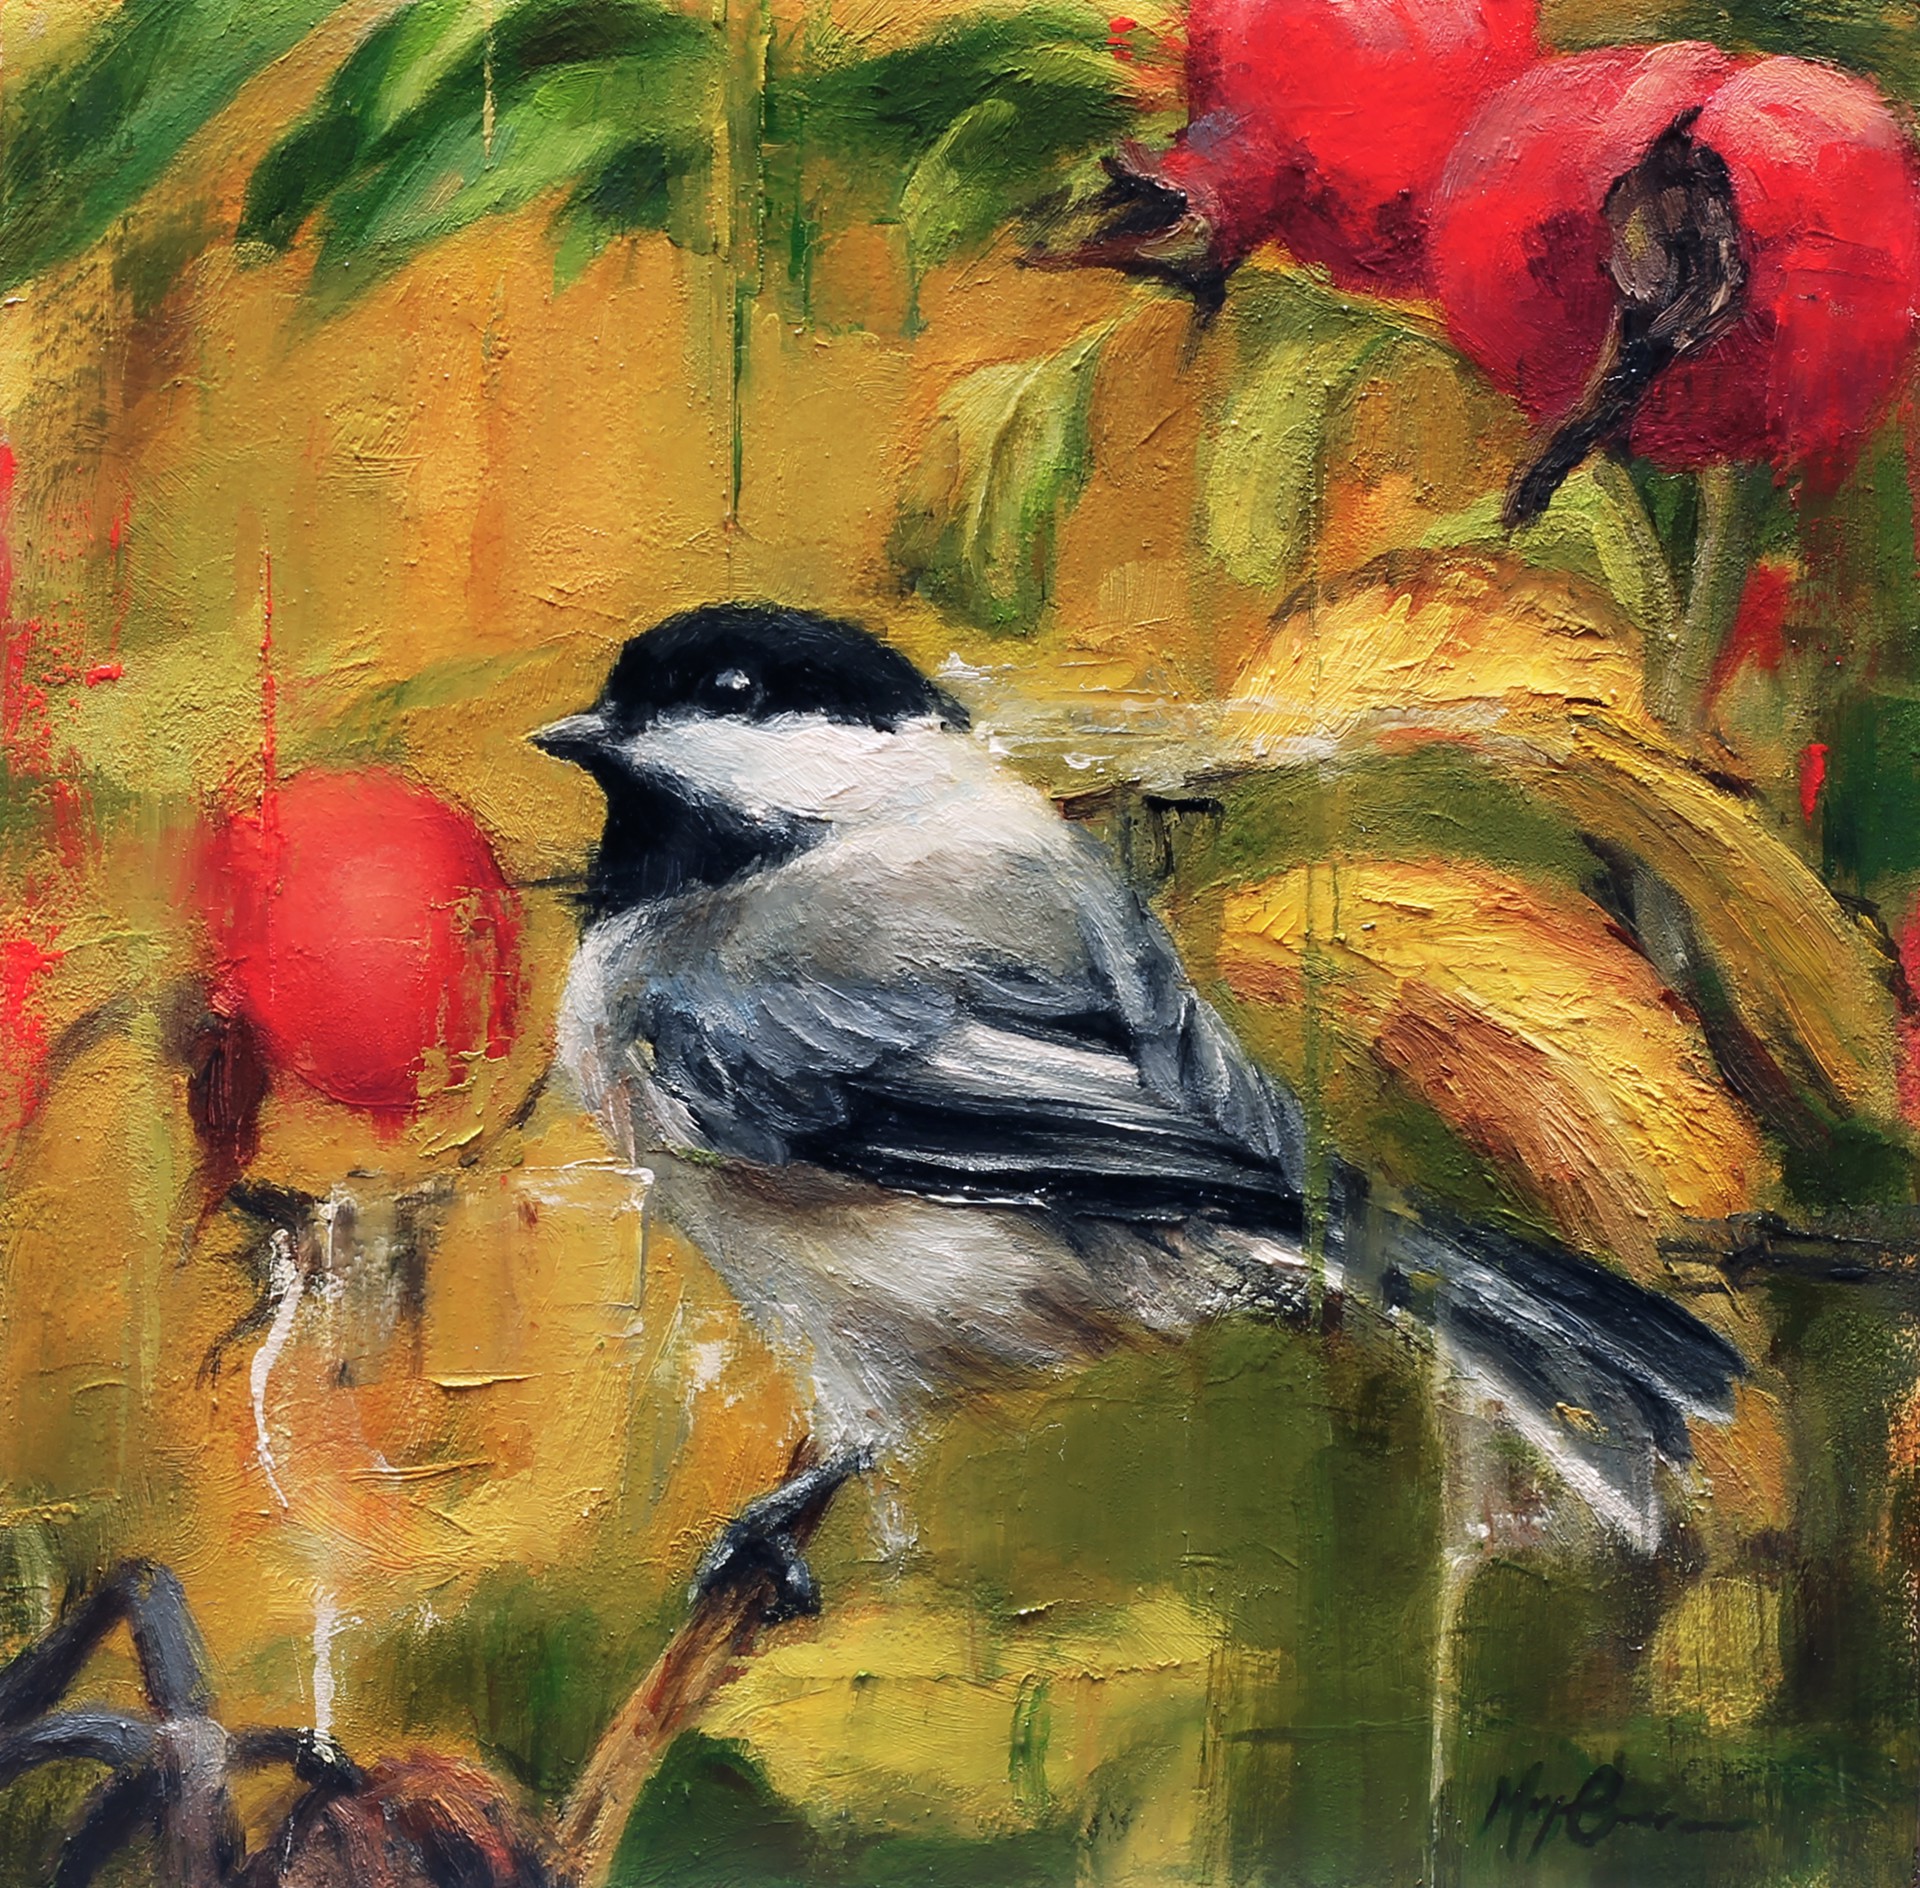 Rosehips and Chickadee by Morgan Cameron